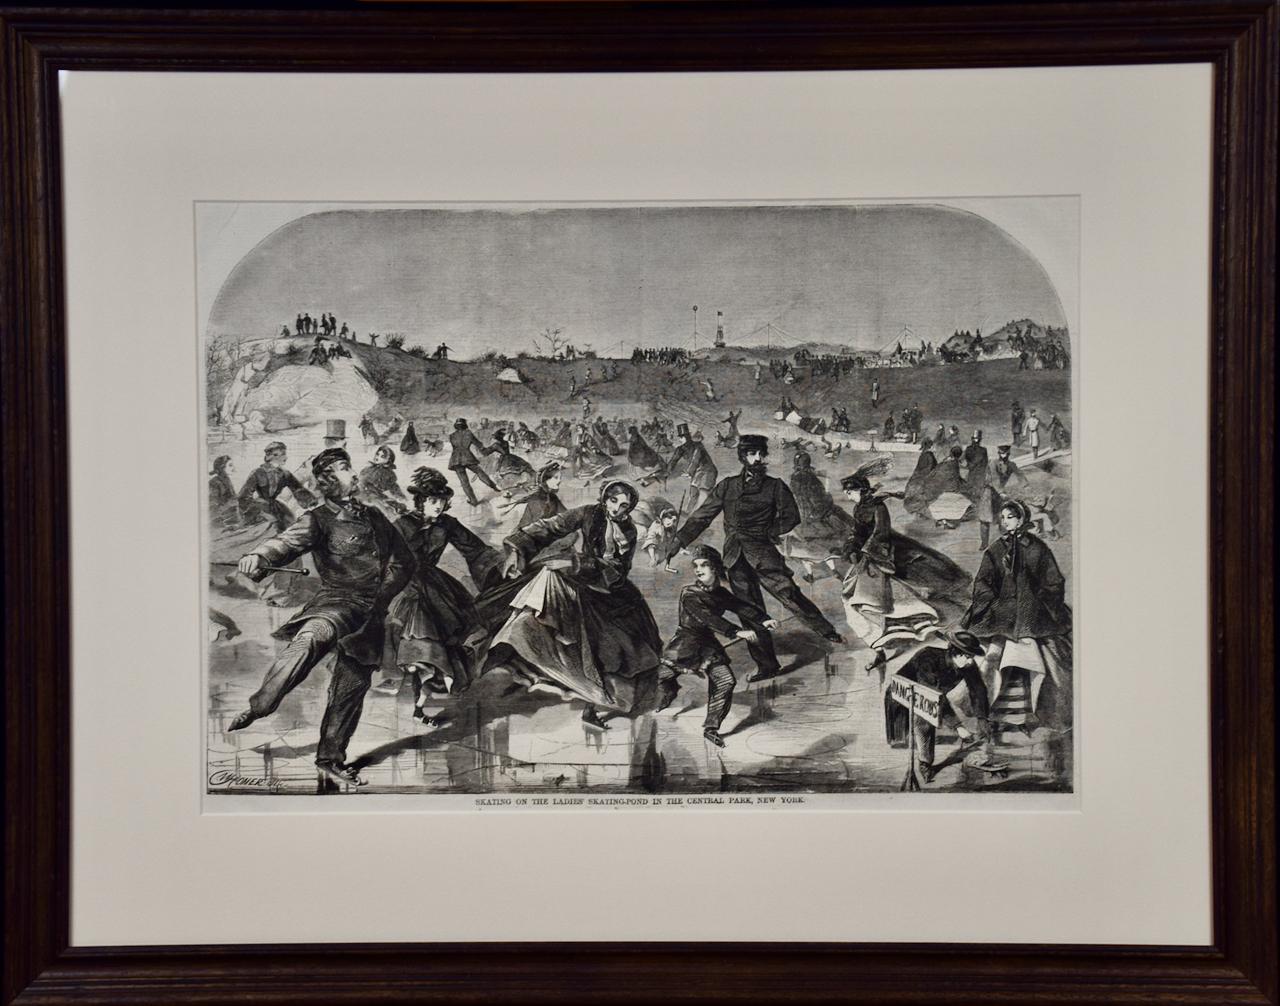 "Skating on Ladies' Pond Central Park": Winslow Homer 19th C. Woodcut Engraving 